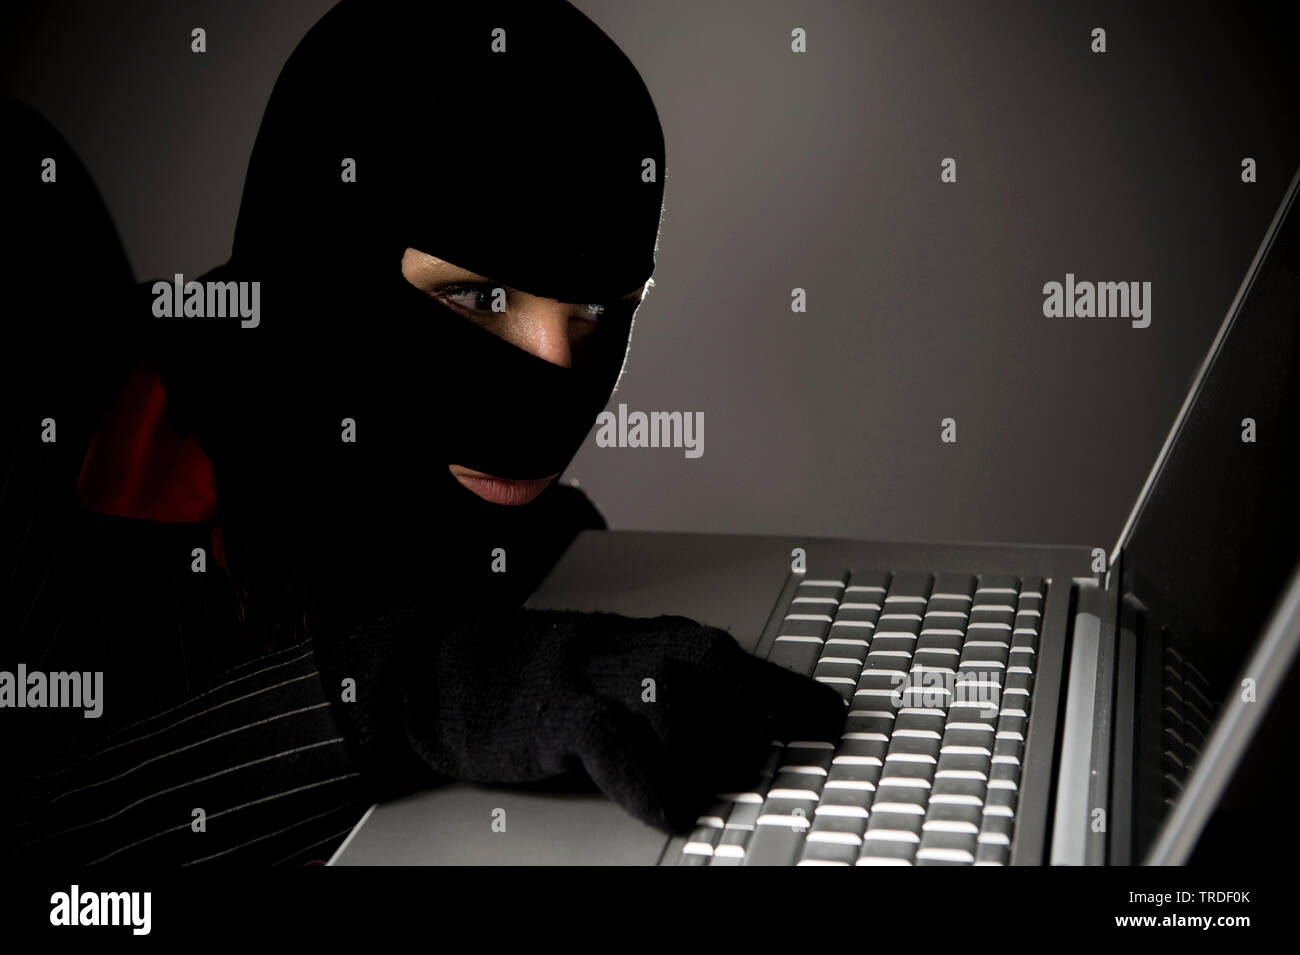 Portrait of an Business woman wearing a ski mask and working with a laptop / Cybercrime Stock Photo